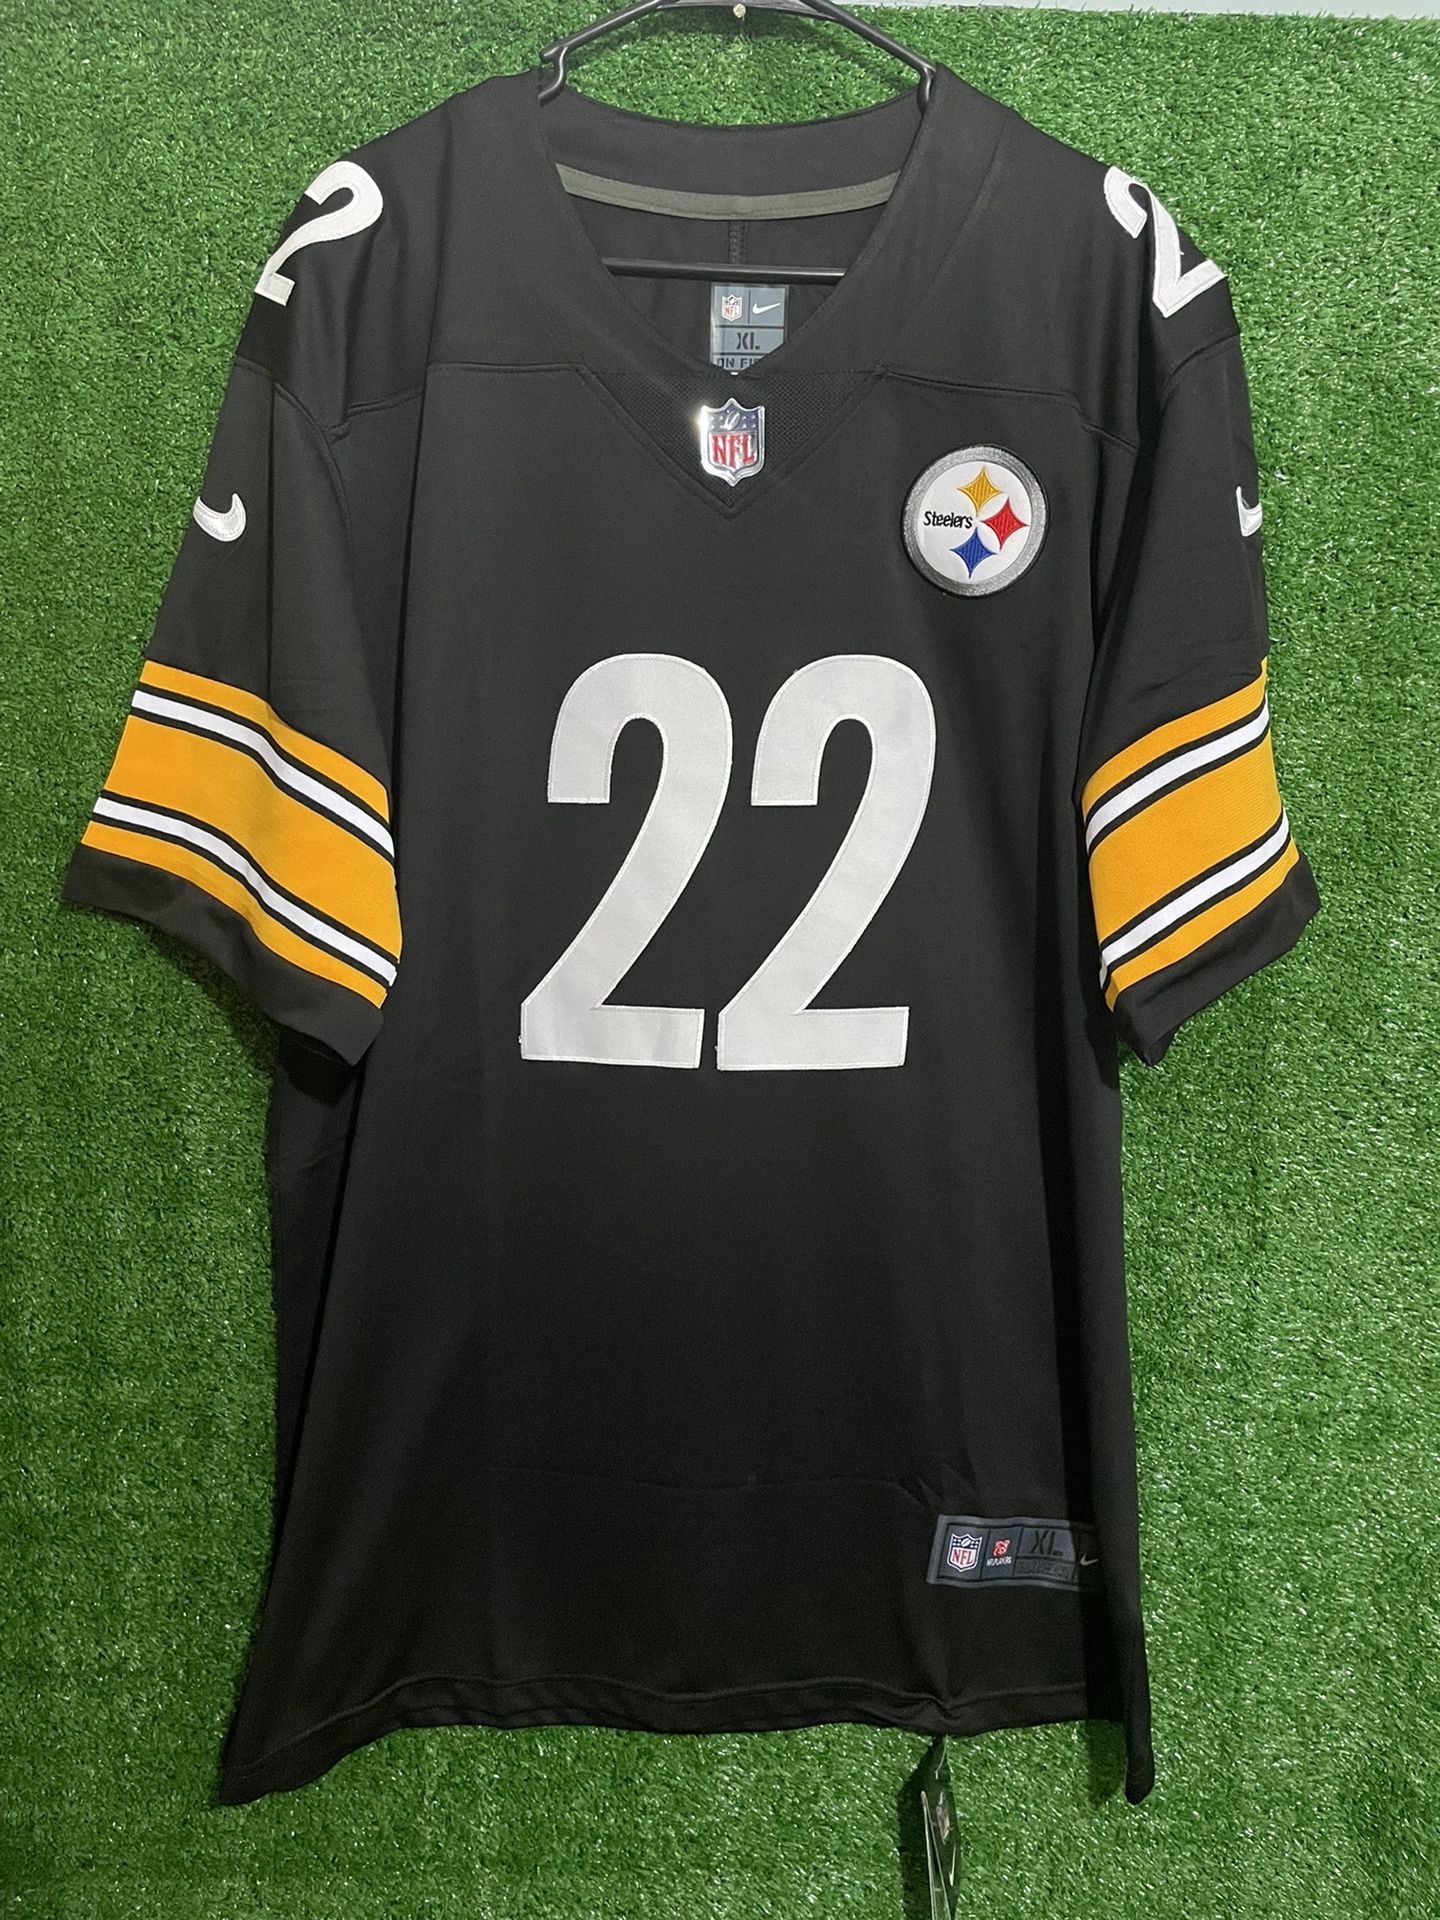 NAJEE HARRIS PITTSBURGH STEELERS NIKE JERSEY BRAND NEW WITH TAGS SIZE XL